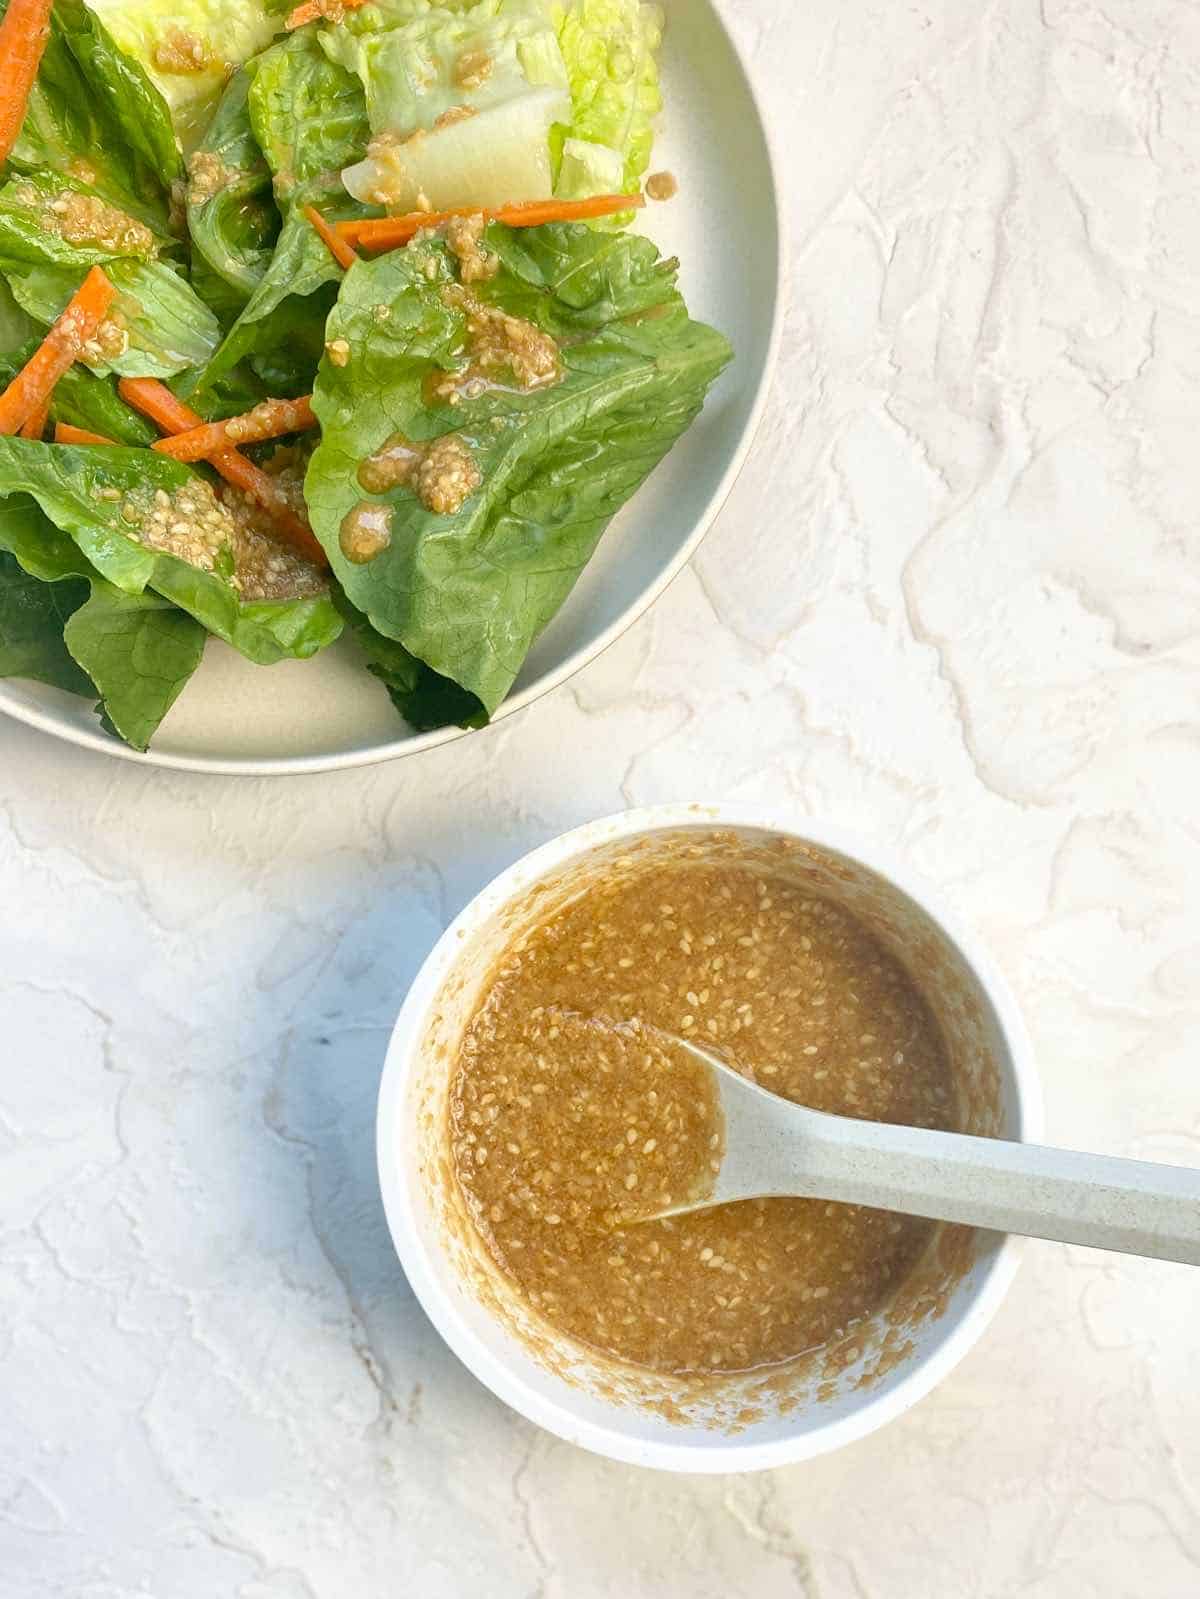 goma dressing with green salad